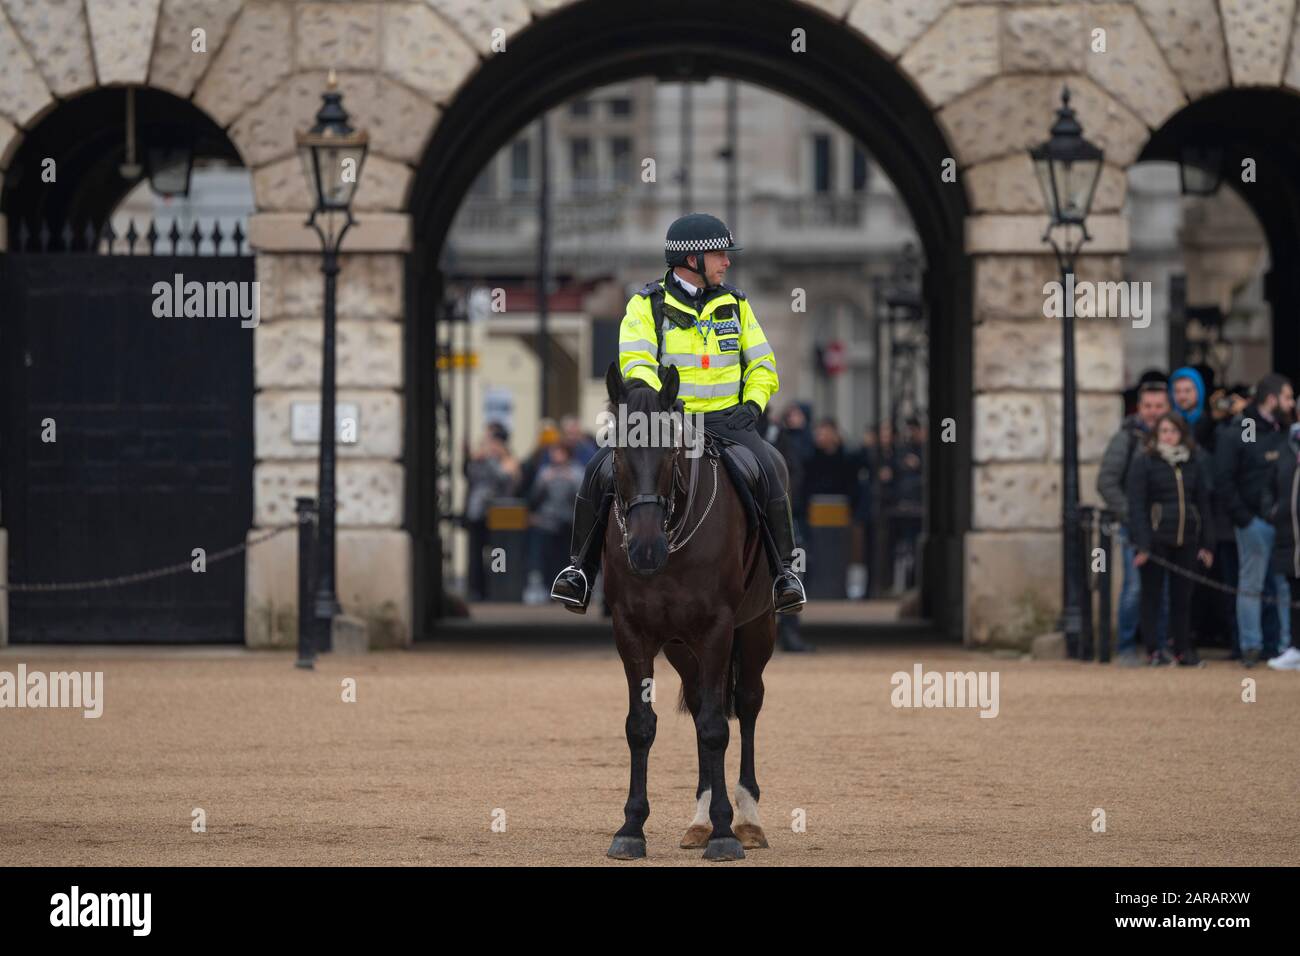 Metropolitan Police mounted officer on duty in front of the archway at Horse Guards Parade during The King’s March event, January 2020, London UK. Stock Photo